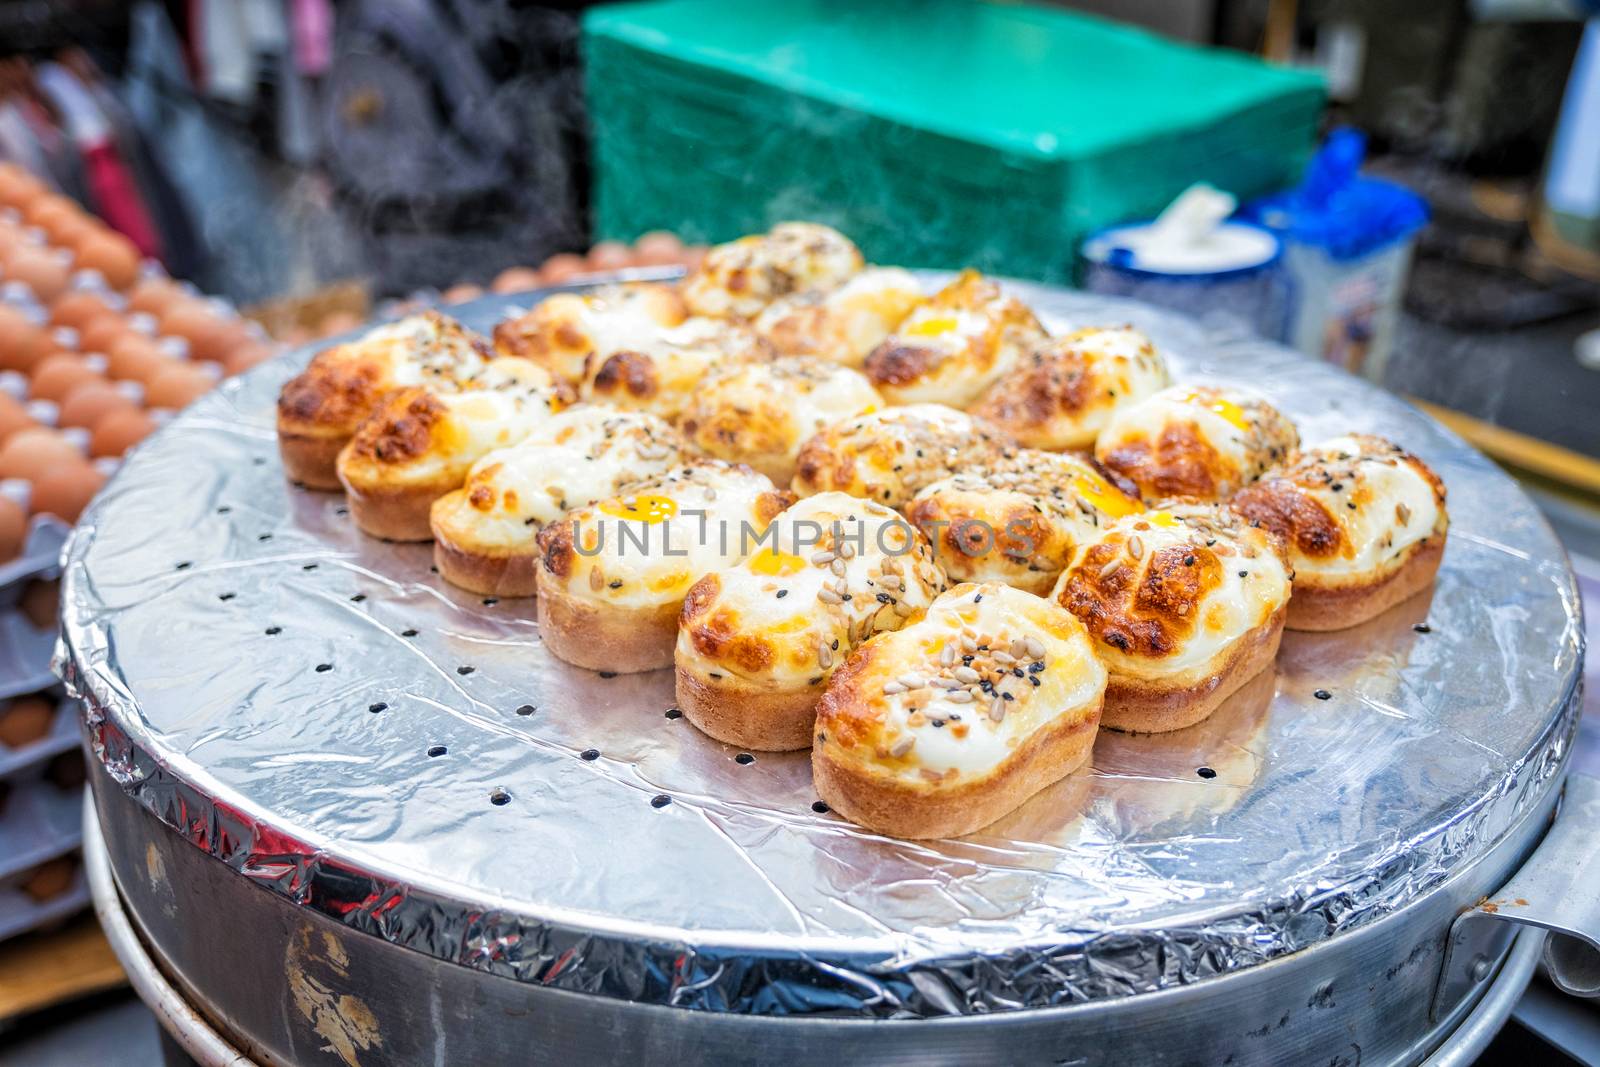 Egg bread with almond, peanut and sunflower seed at Myeong-dong street food, Seoul, South Korea 